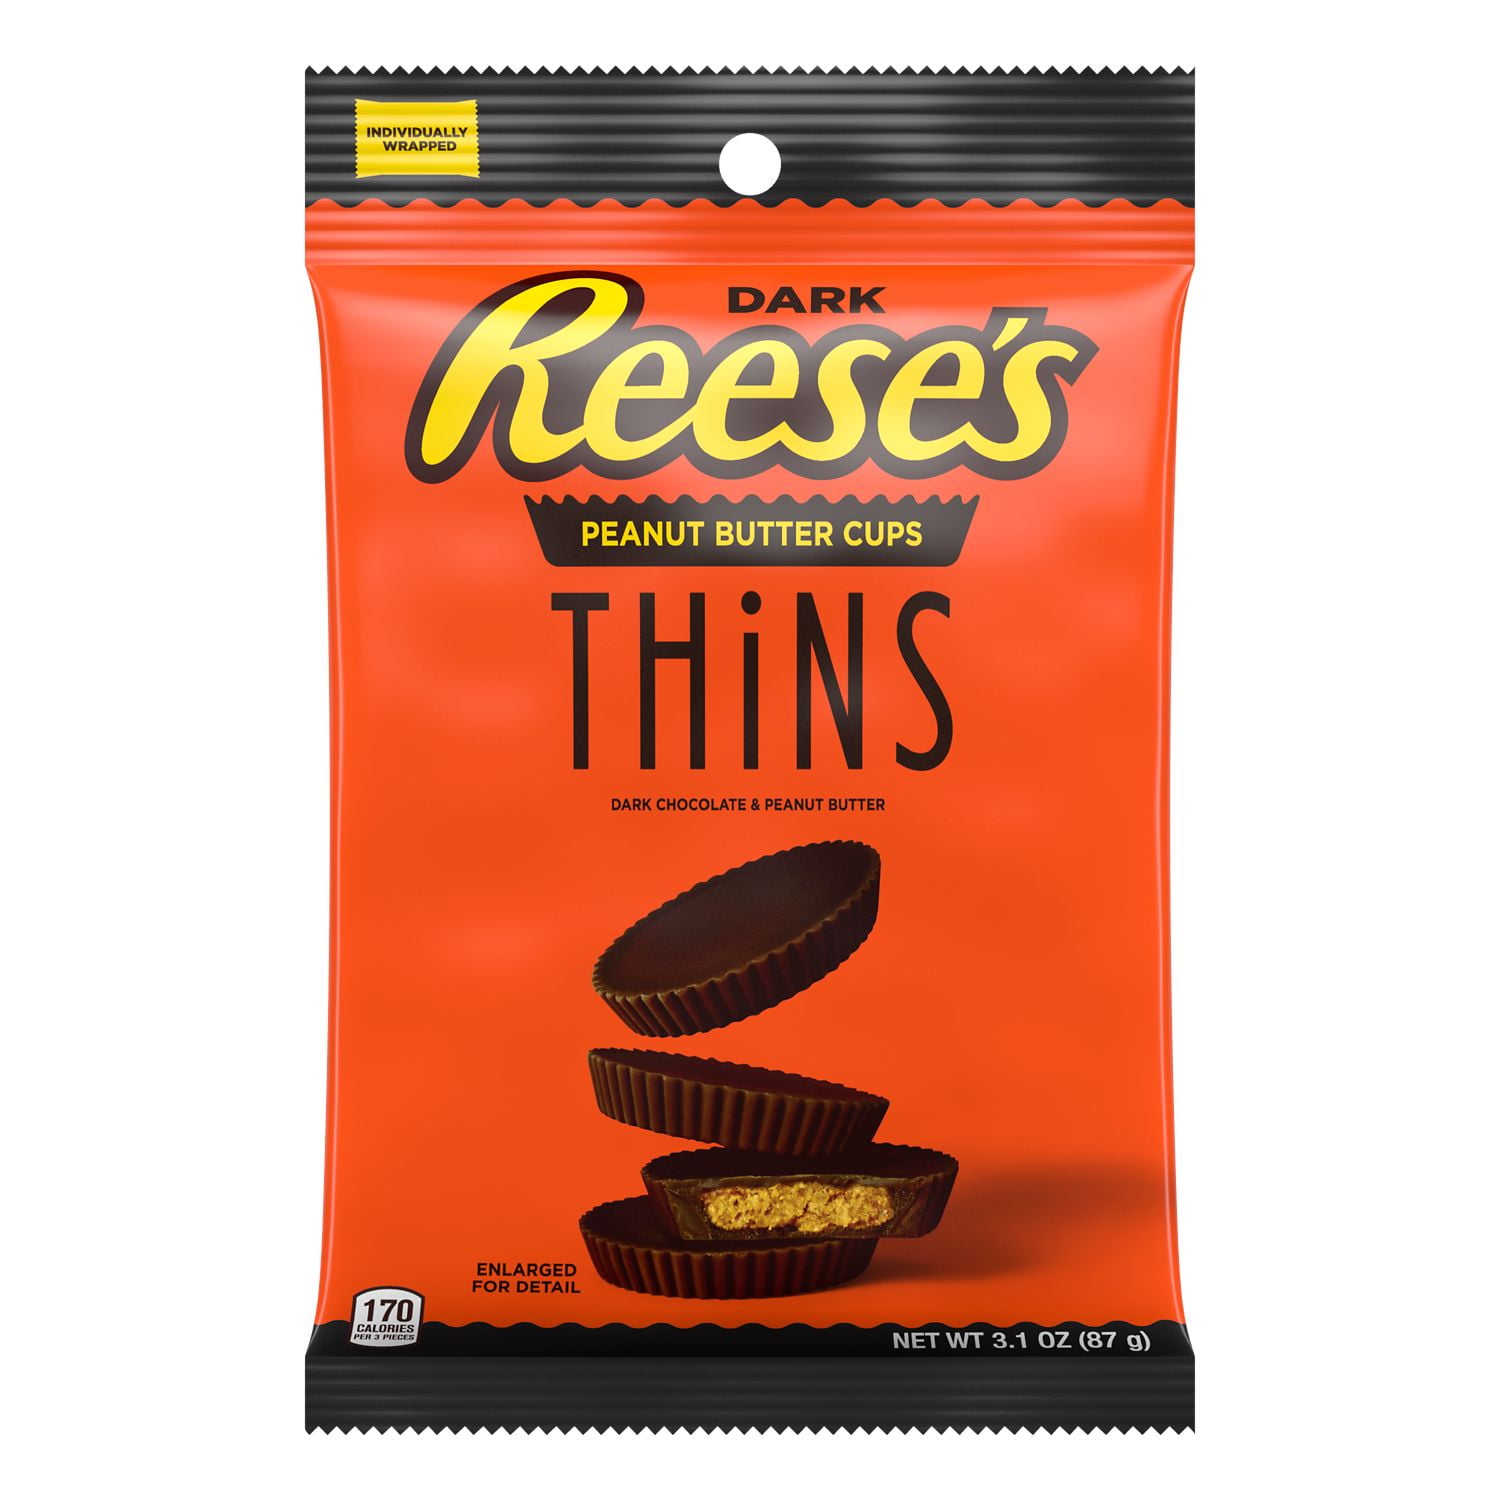 REESE'S, THiNS Dark Chocolate Peanut Butter Cups Candy, Individually Wrapped, 3.1 oz, Bag